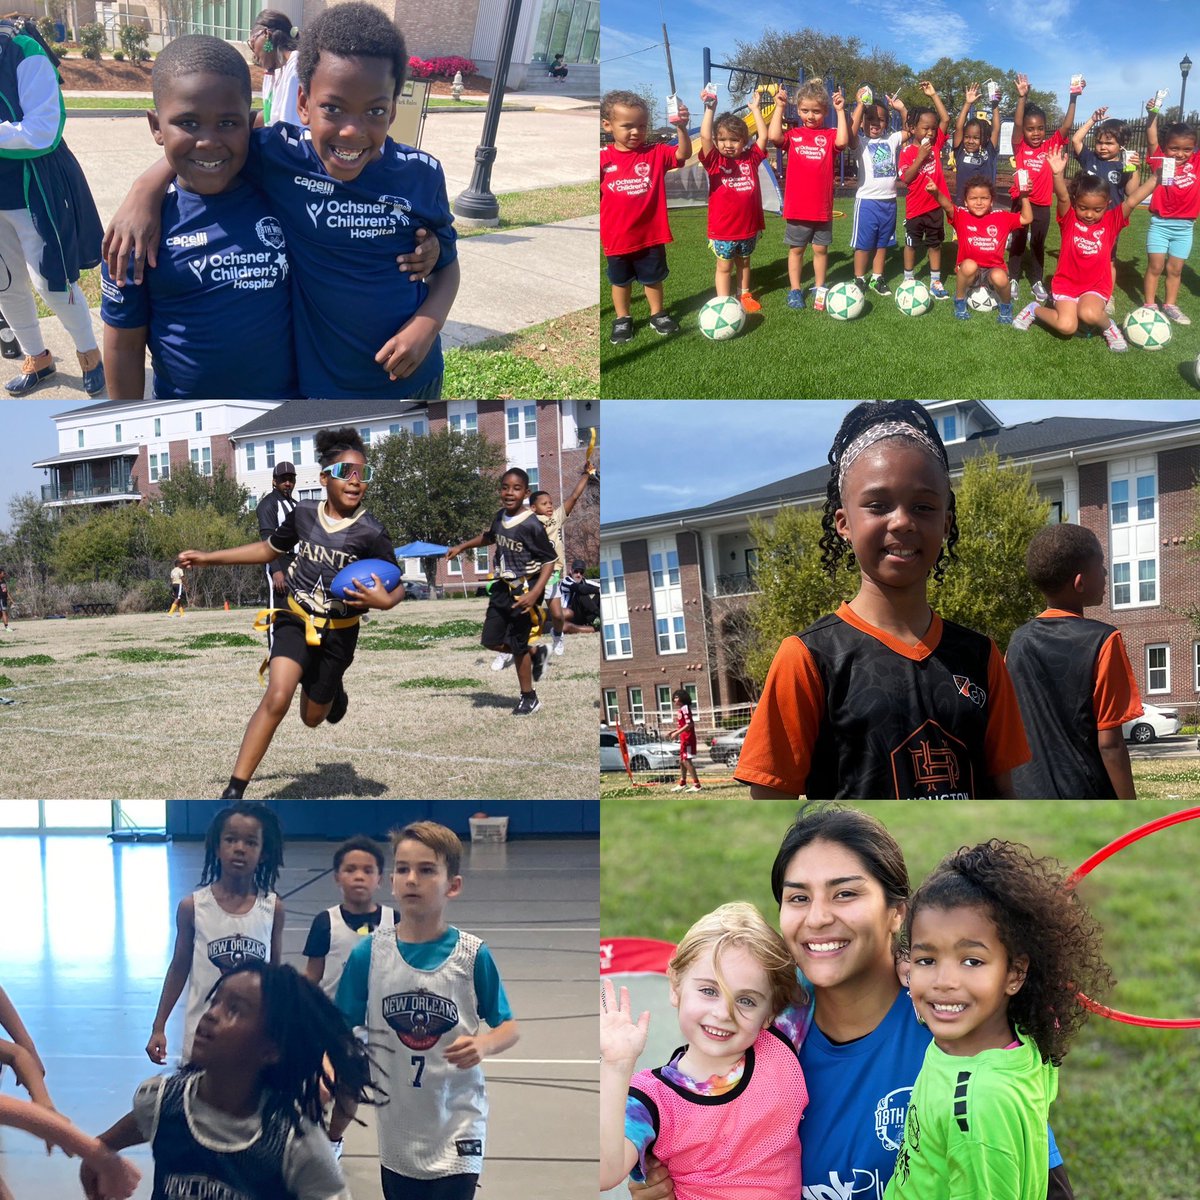 Weekend recap: Tykes (ages 3-4) Soccer, Youth Sports Community (ages 5-7), @nflflag Football games, @jrnba Basketball games, @mlsgo Soccer games…😅⚽️🏈🏀 Thanks to @RCXsports